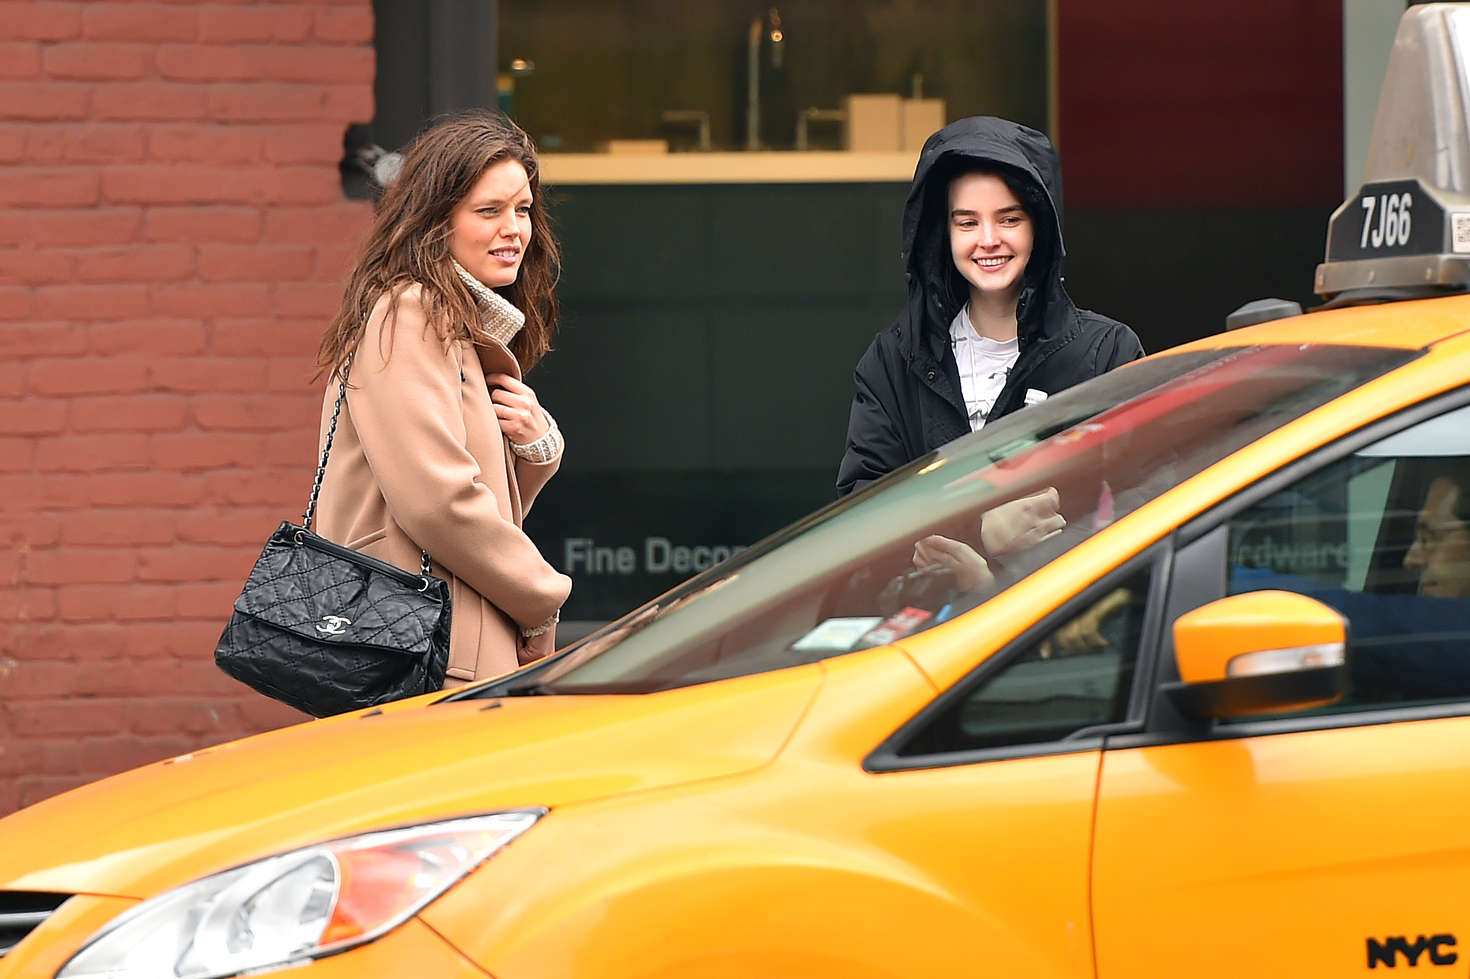 Emily DiDonato and Ali Michael out in New York